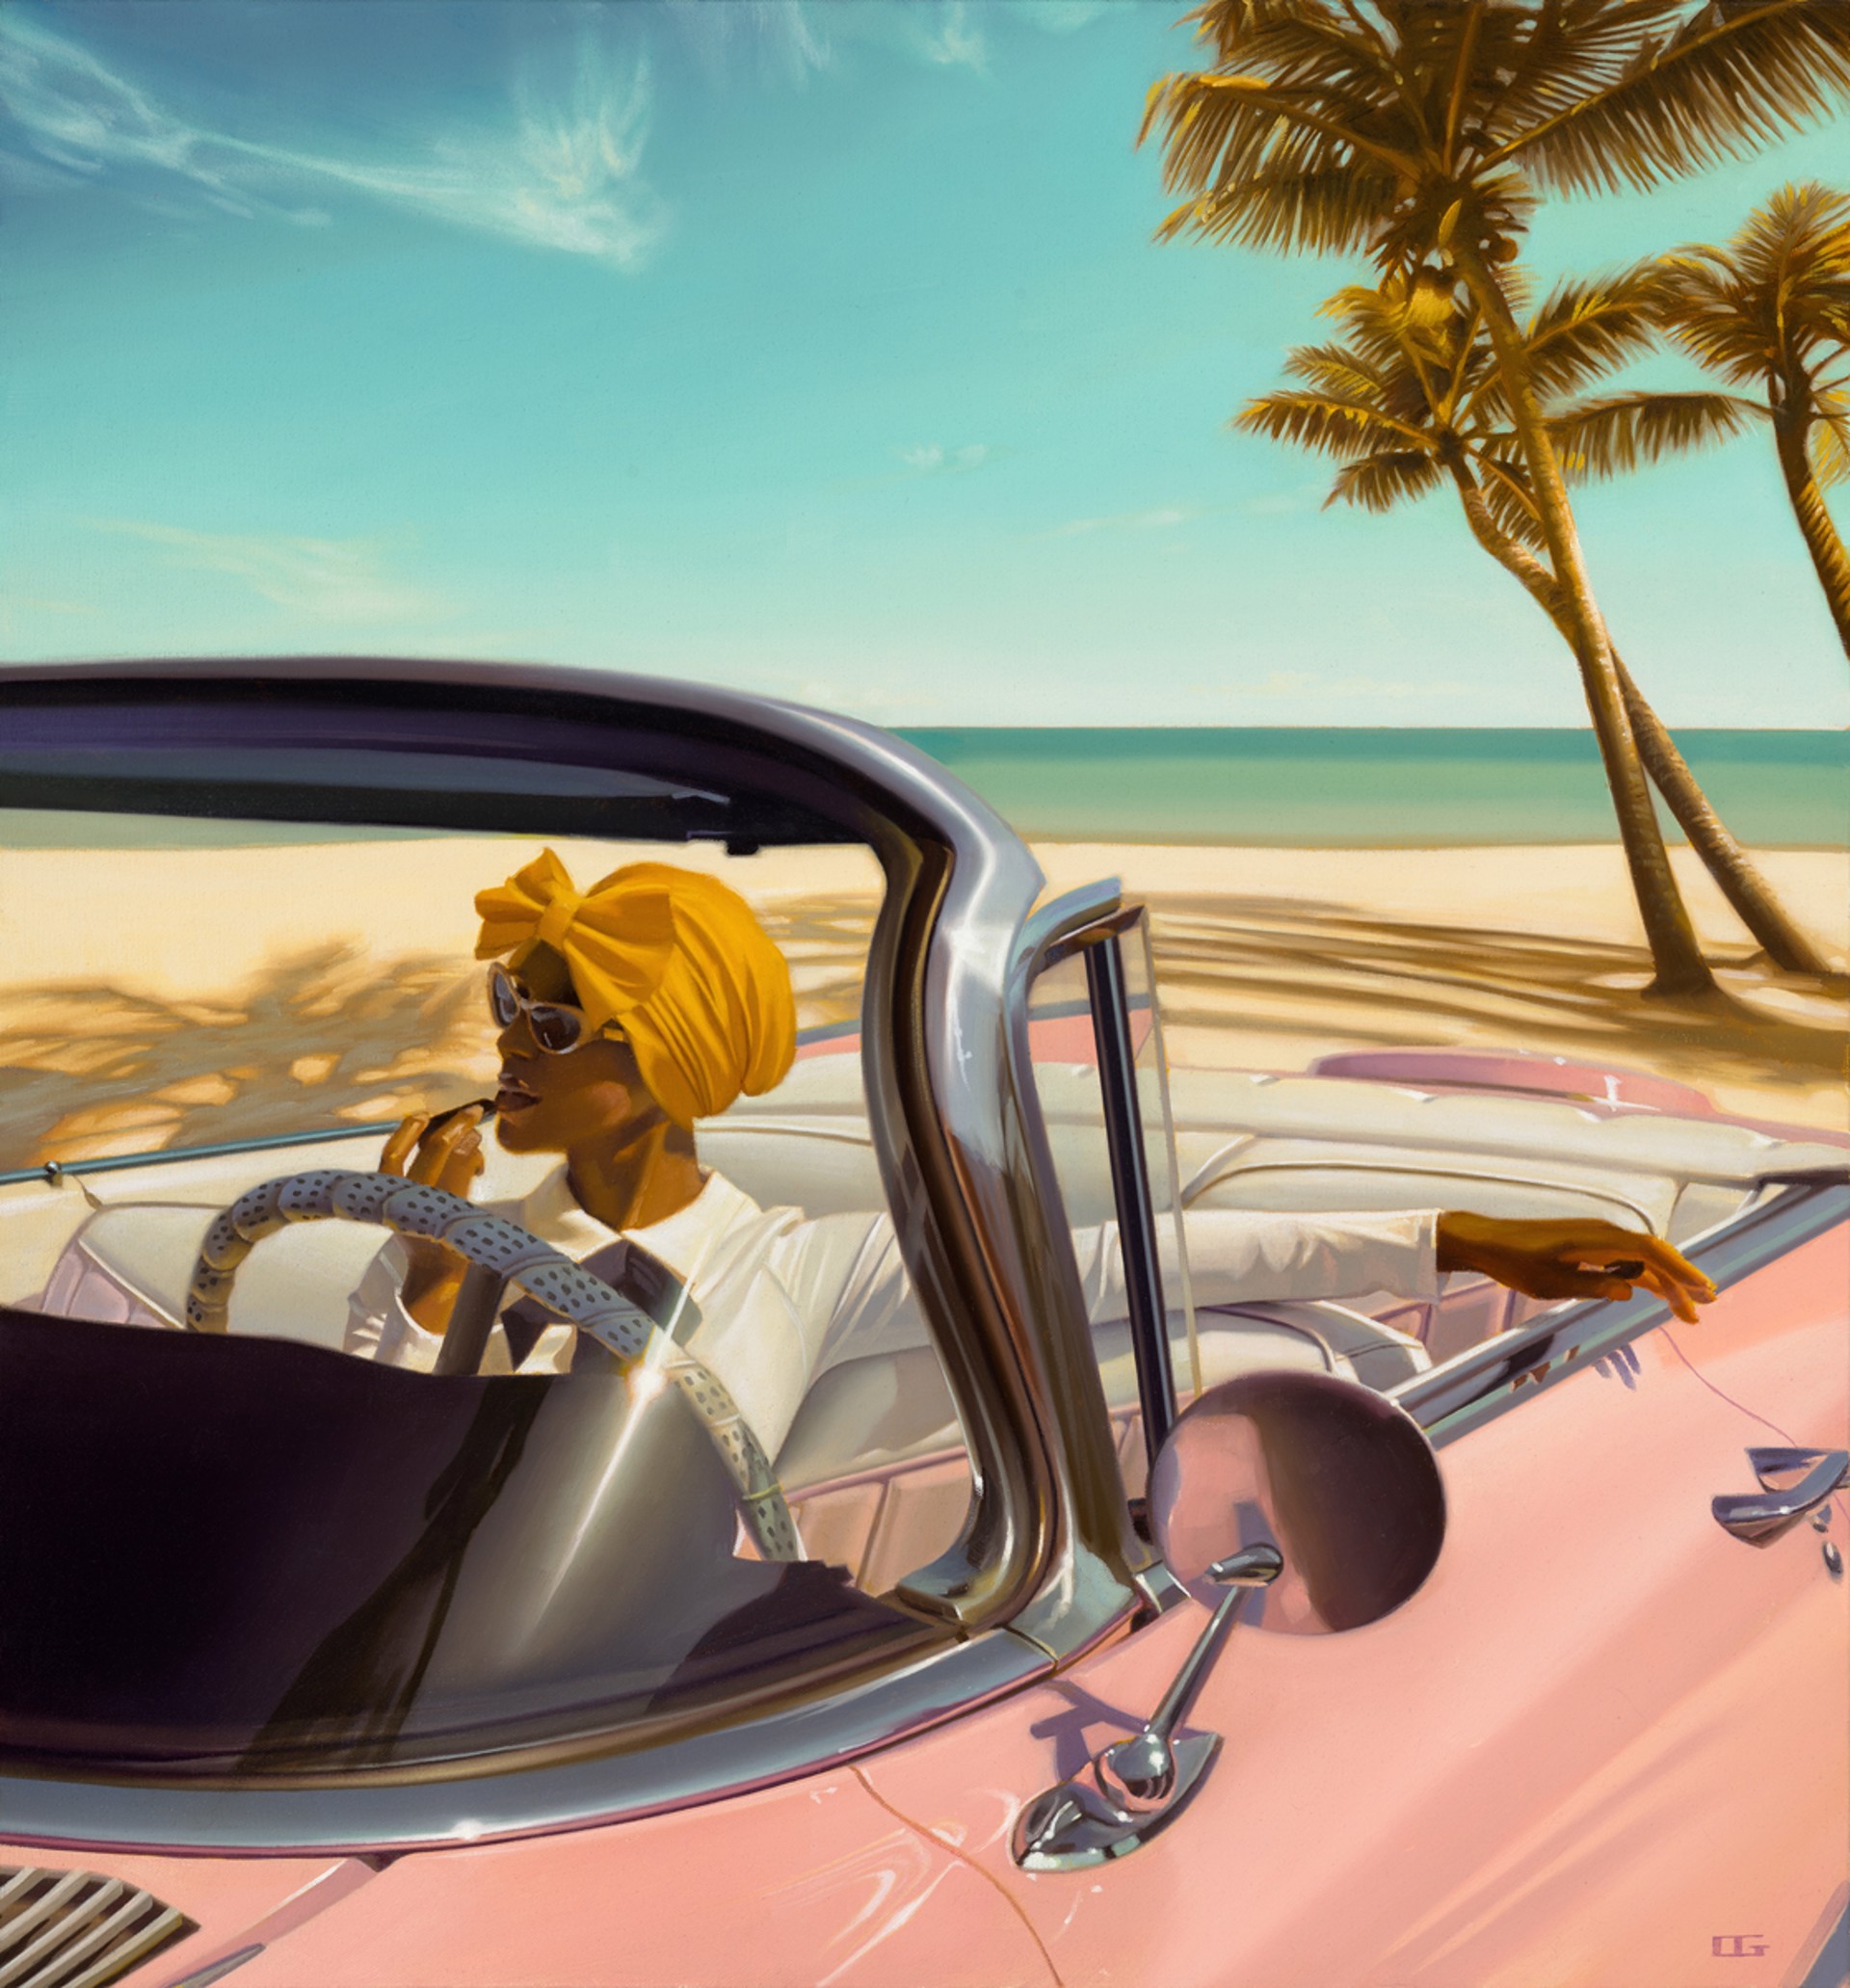 I'm in the Pink Caddy, Can't Miss It by Carrie Graber